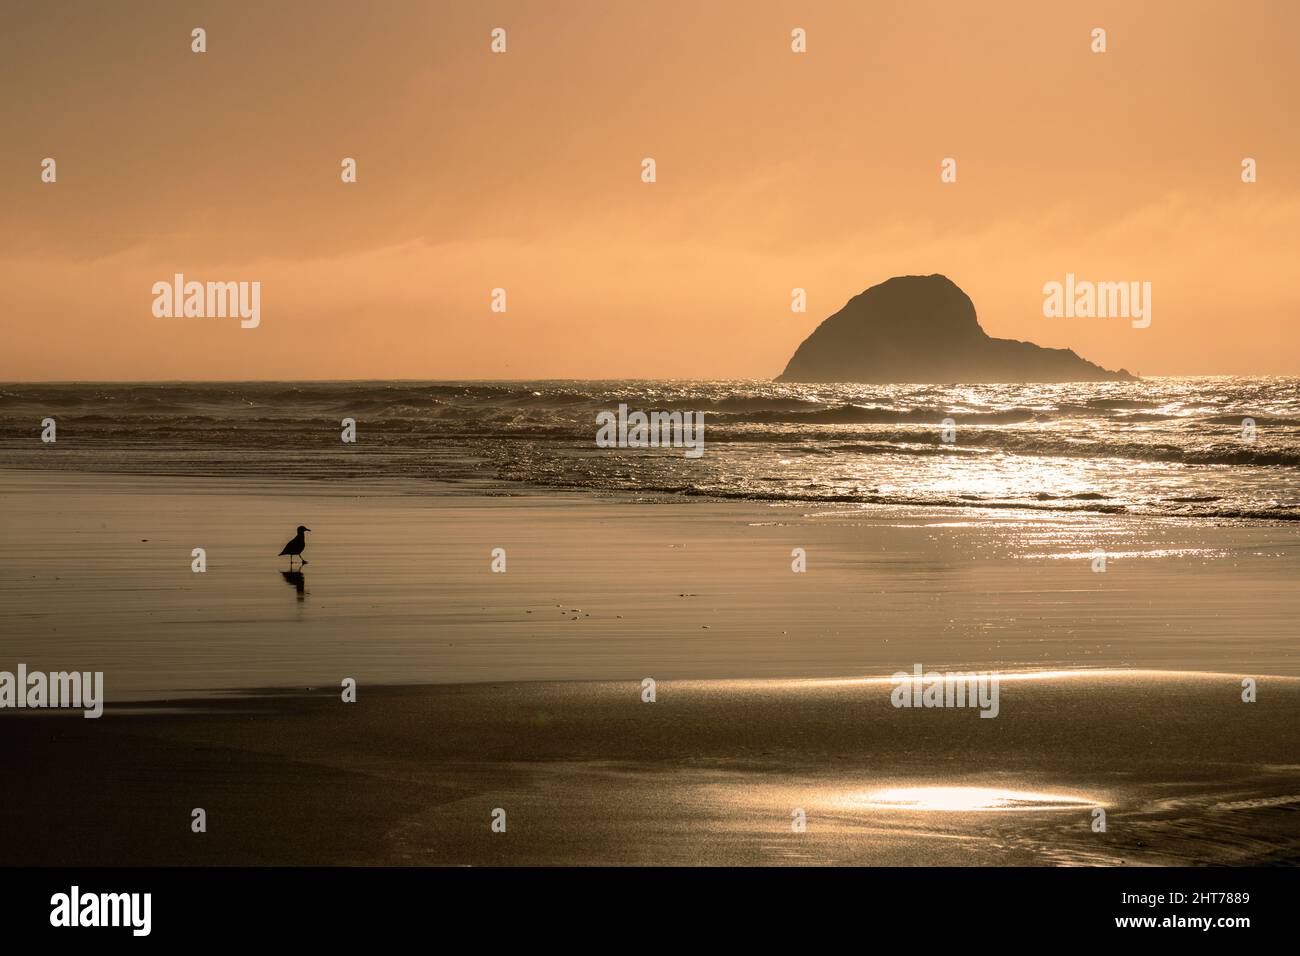 Large off-shore rock and seagull silhouetted against late afternoon warm sky.  Photographed at Trinidad State Beach in Trinidad California, USA. Stock Photo